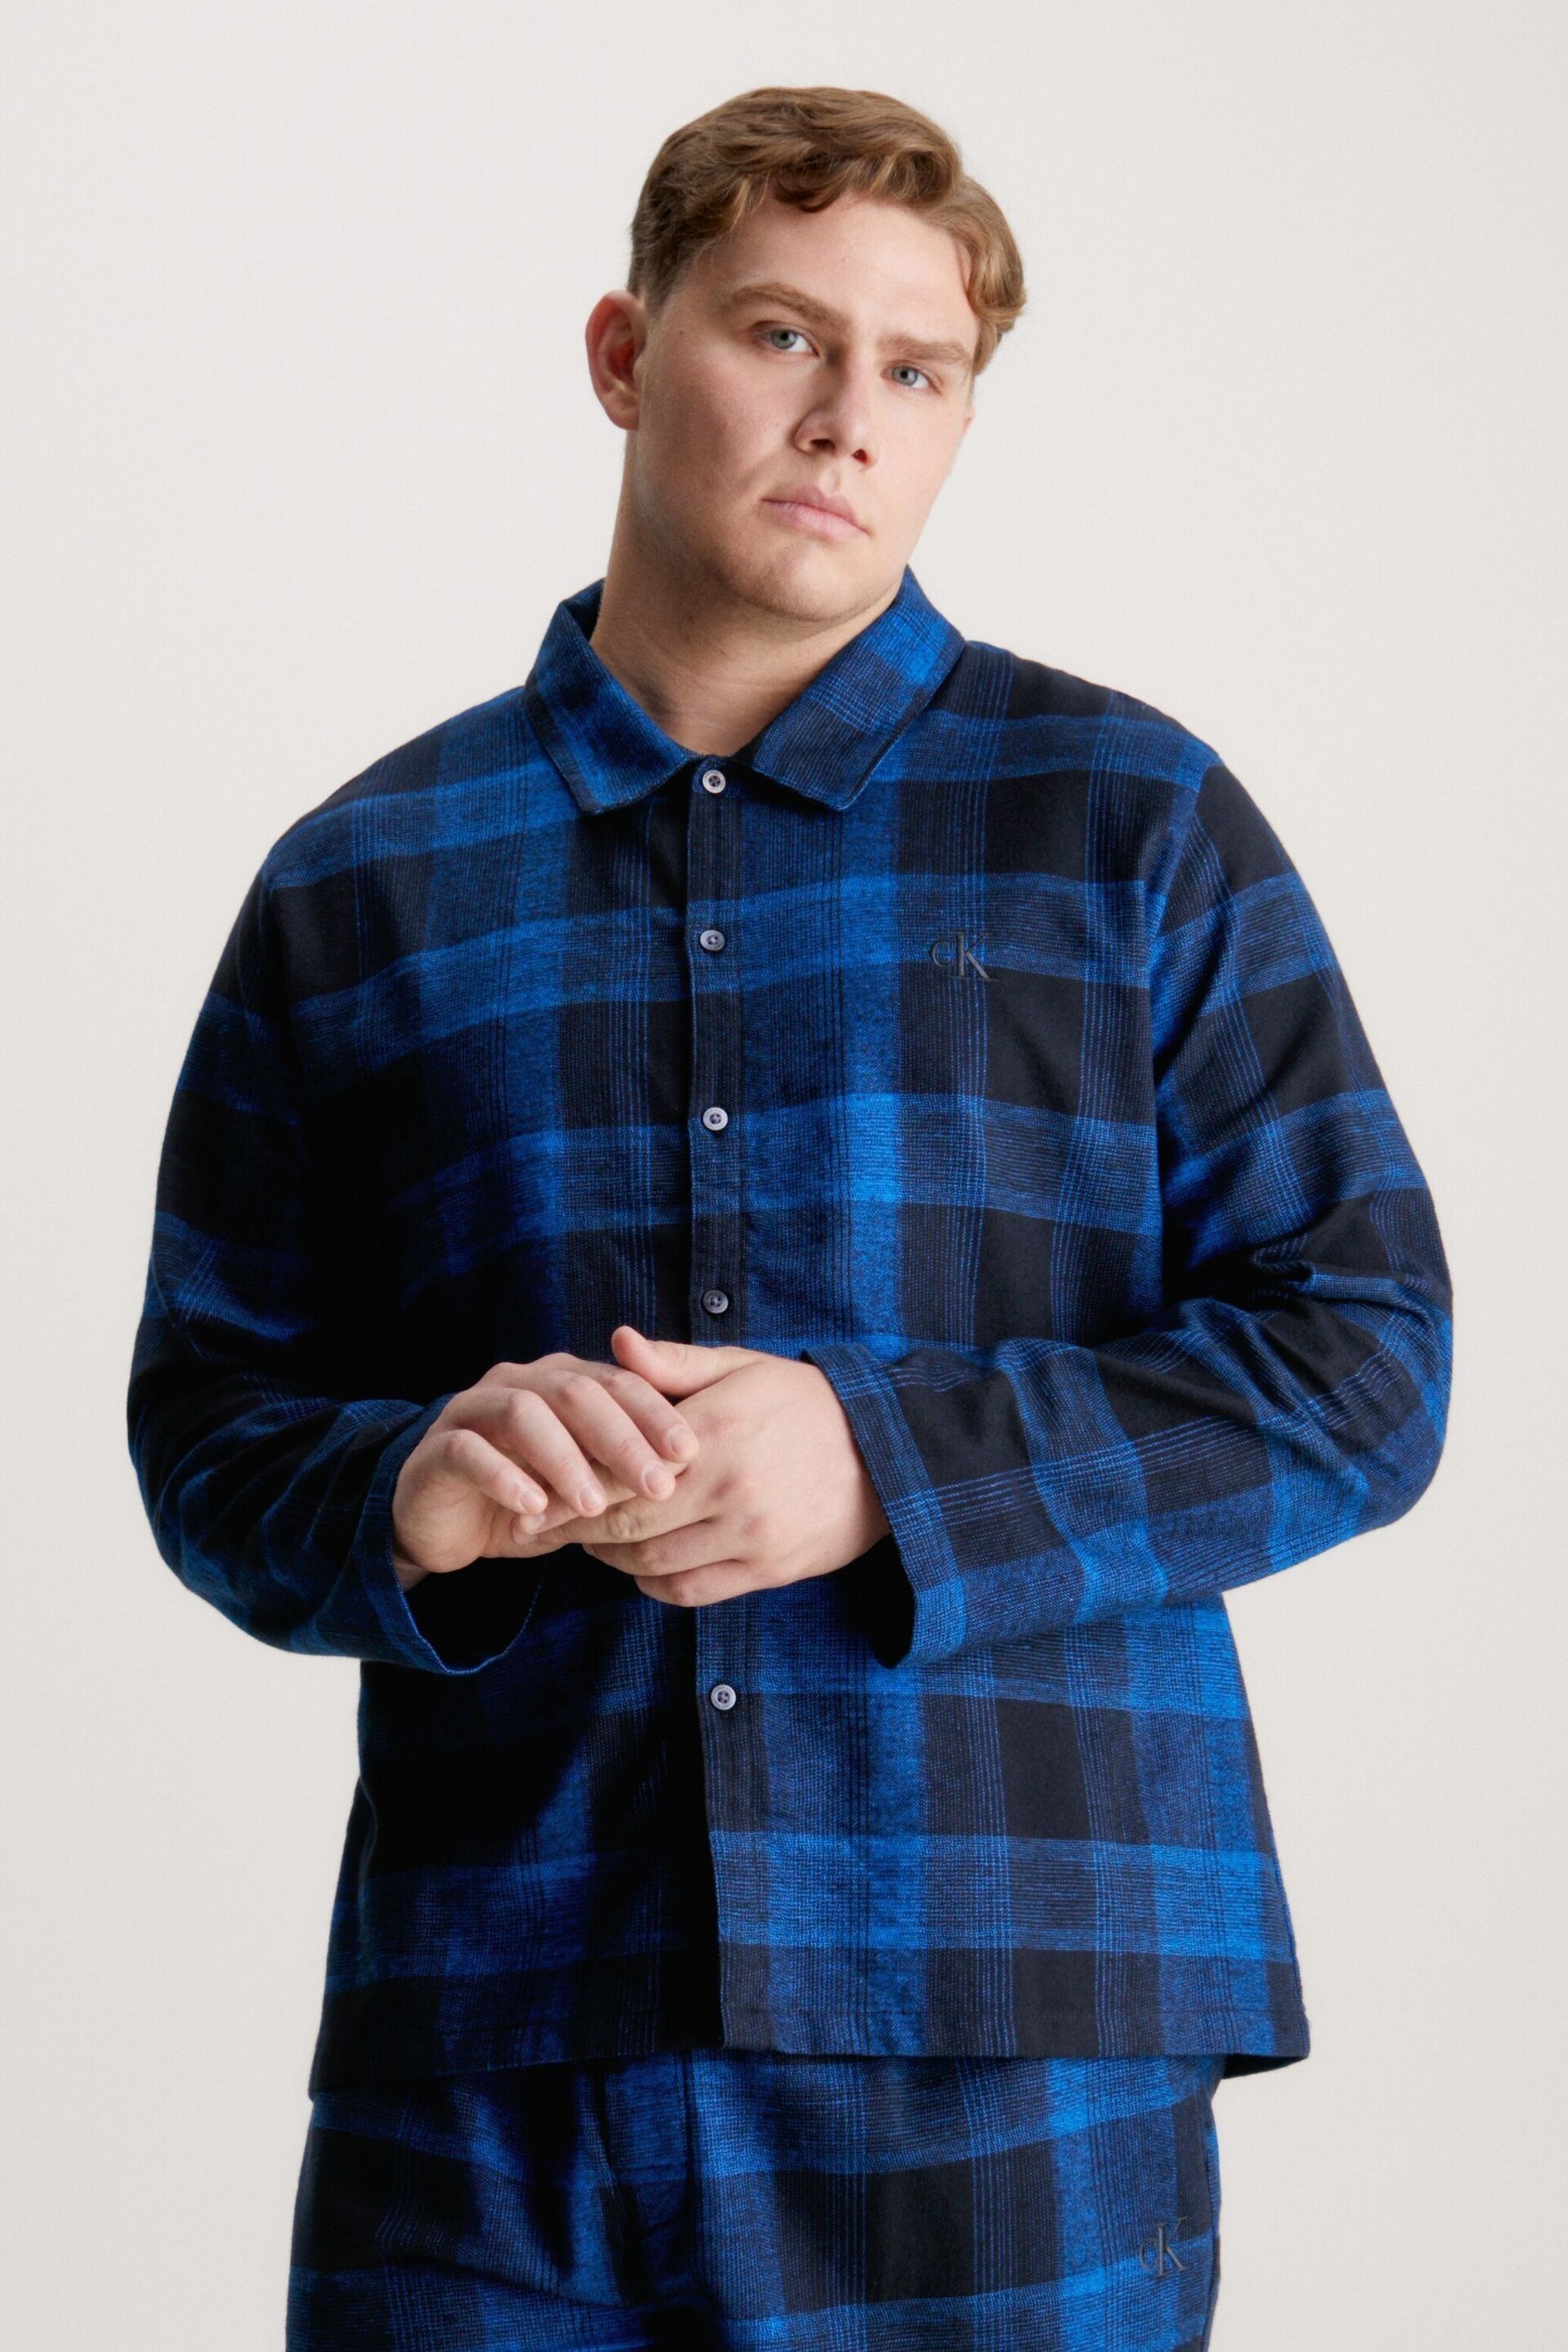 Calvin Klein Black Pure Flannel Lounge Shirt - Image 1 of 5